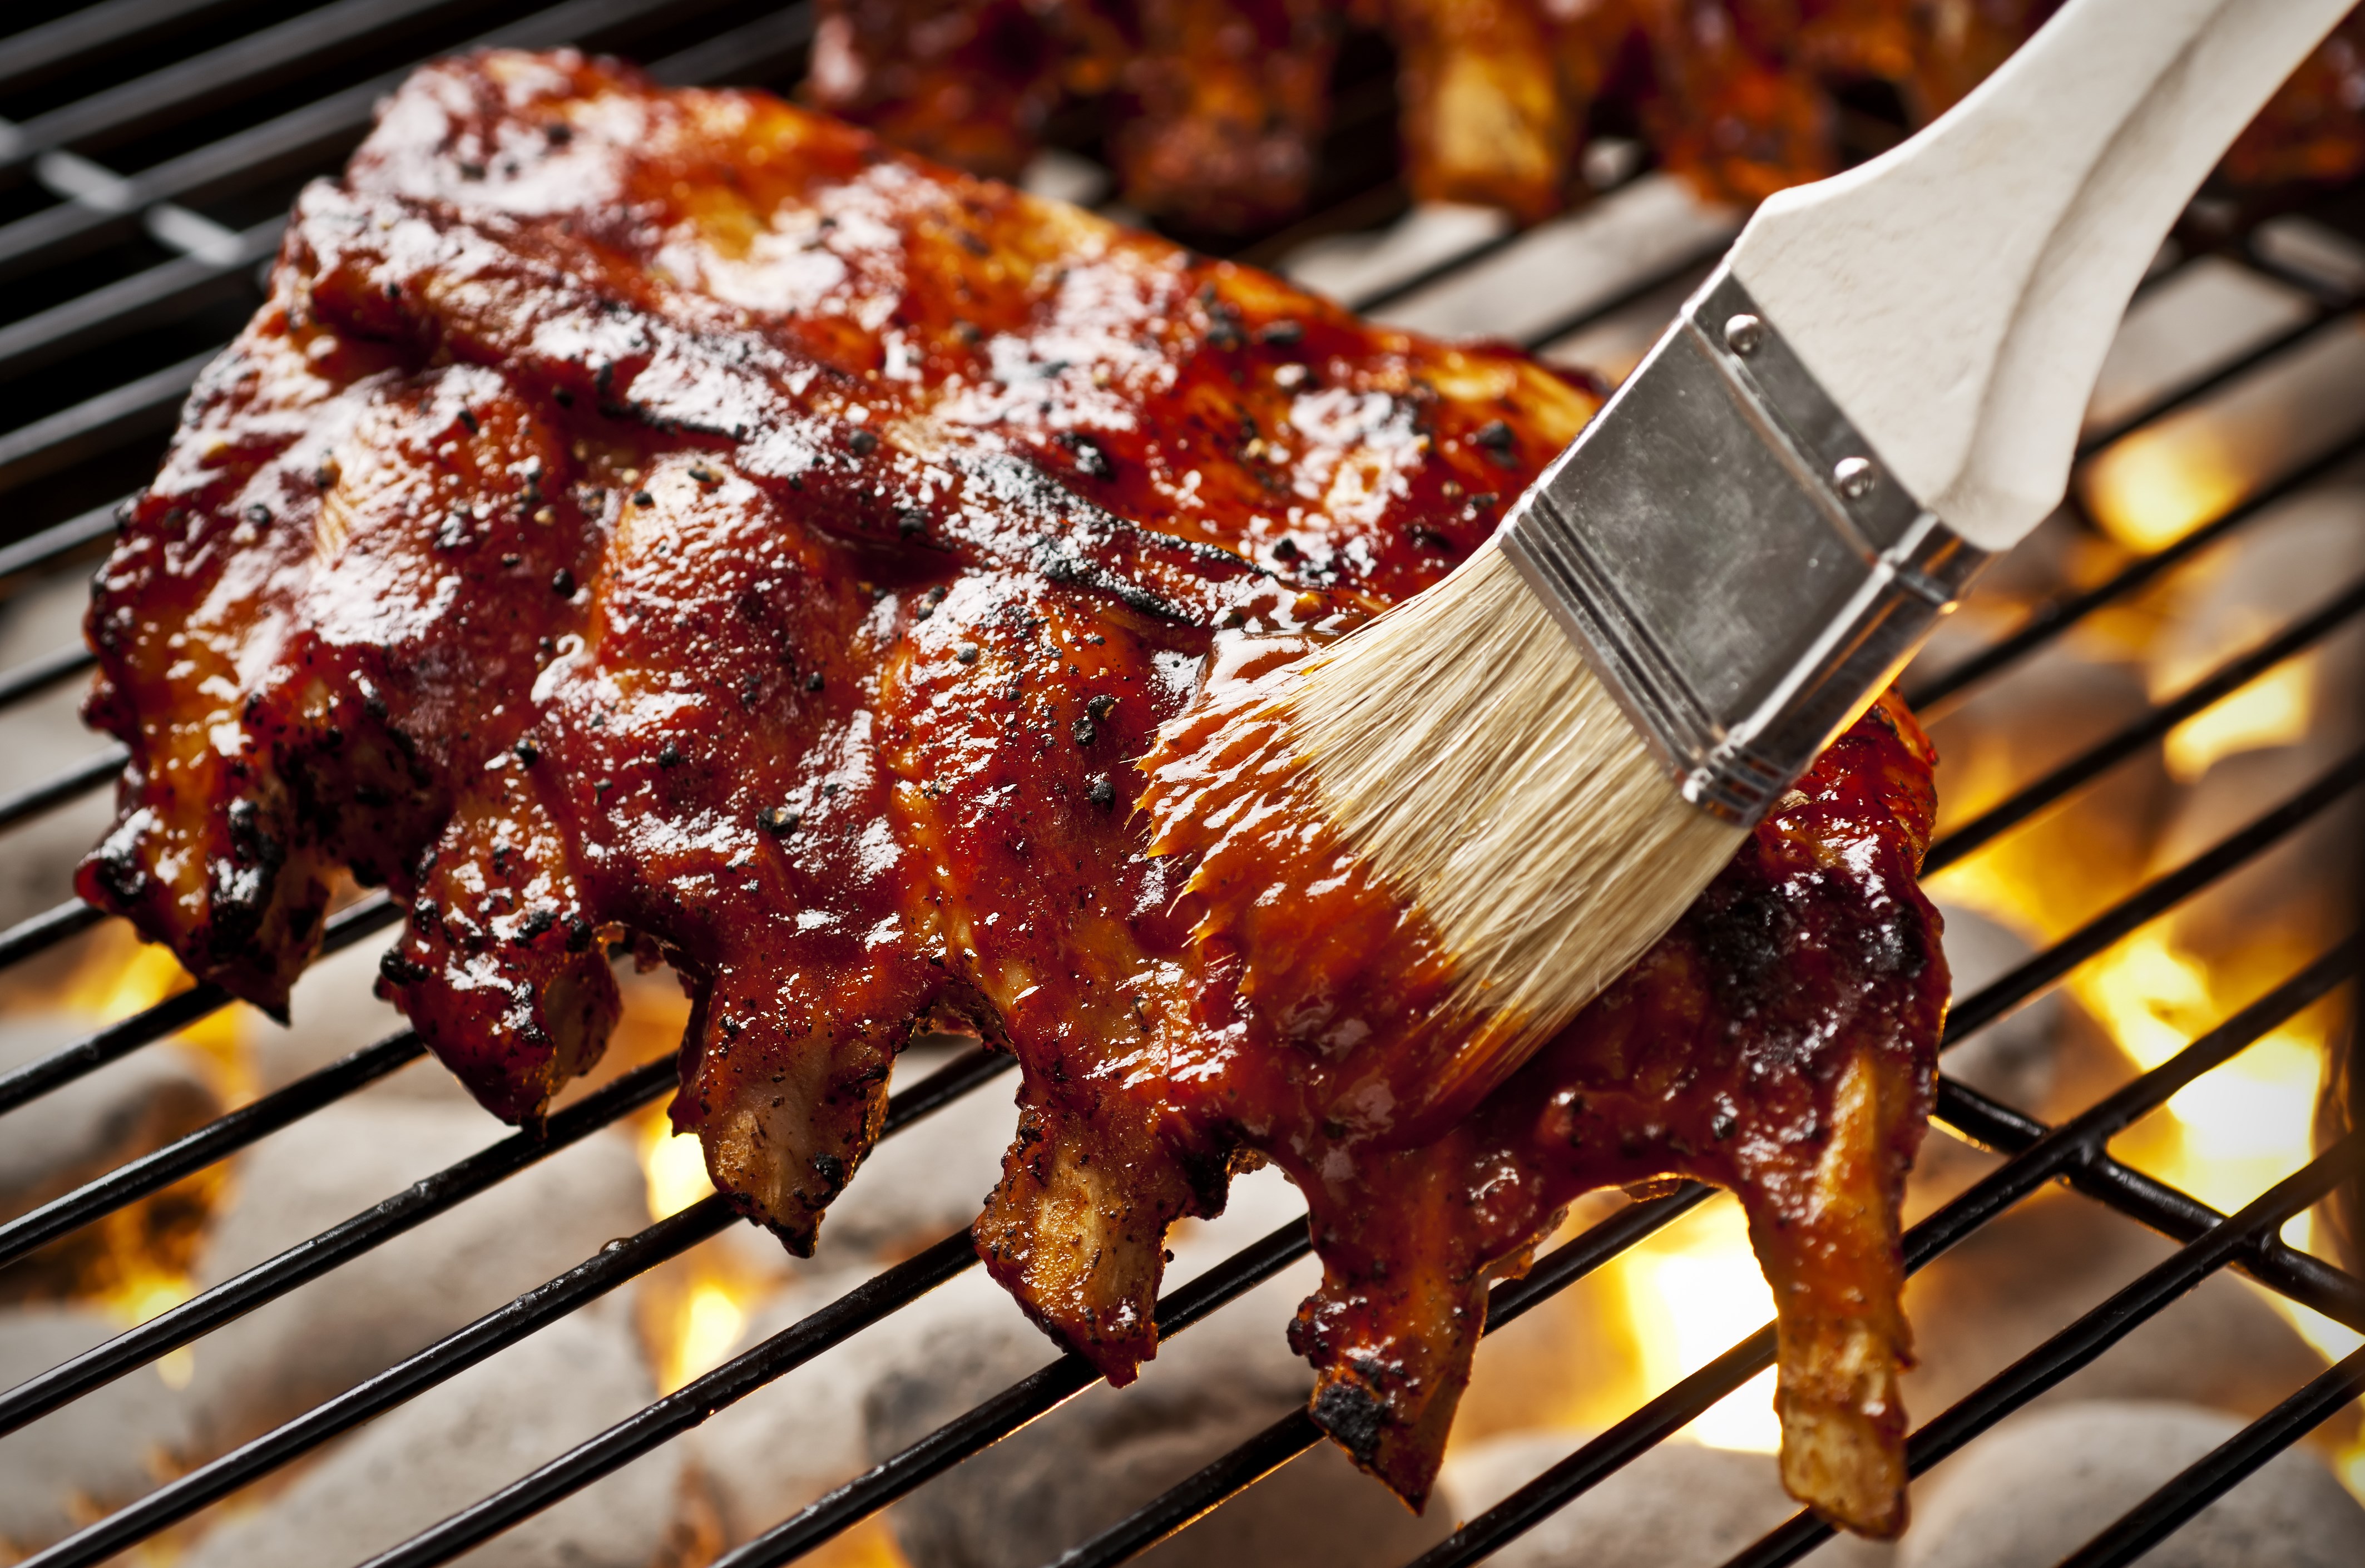 Fire Up the Grill! BISSELL Rental's best grilling and cleaning tips will make throwing your summer party as easy as can be.